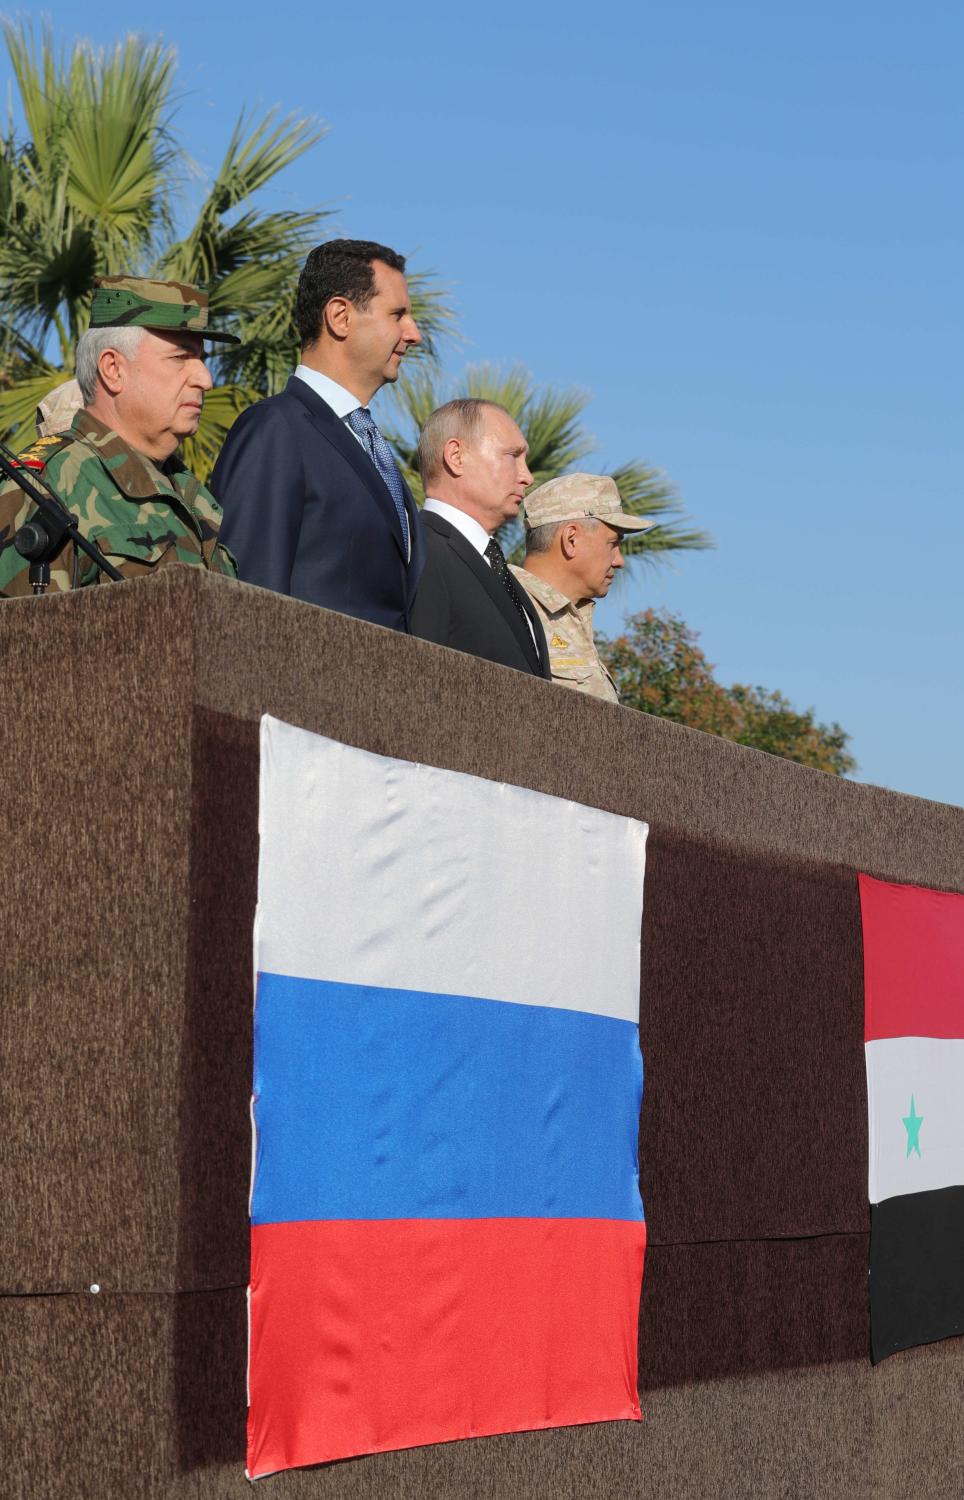 Russian President Vladimir Putin (2nd R), Defence Minister Sergei Shoigu (R) and Syrian President Bashar al-Assad (2nd L) visit the Hmeymim air base in Latakia Province, Syria December 11, 2017. Sputnik/Mikhail Klimentyev/Sputnik via REUTERS ATTENTION EDITORS - THIS IMAGE WAS PROVIDED BY A THIRD PARTY. TPX IMAGES OF THE DAY - RC1CC01C9AF0